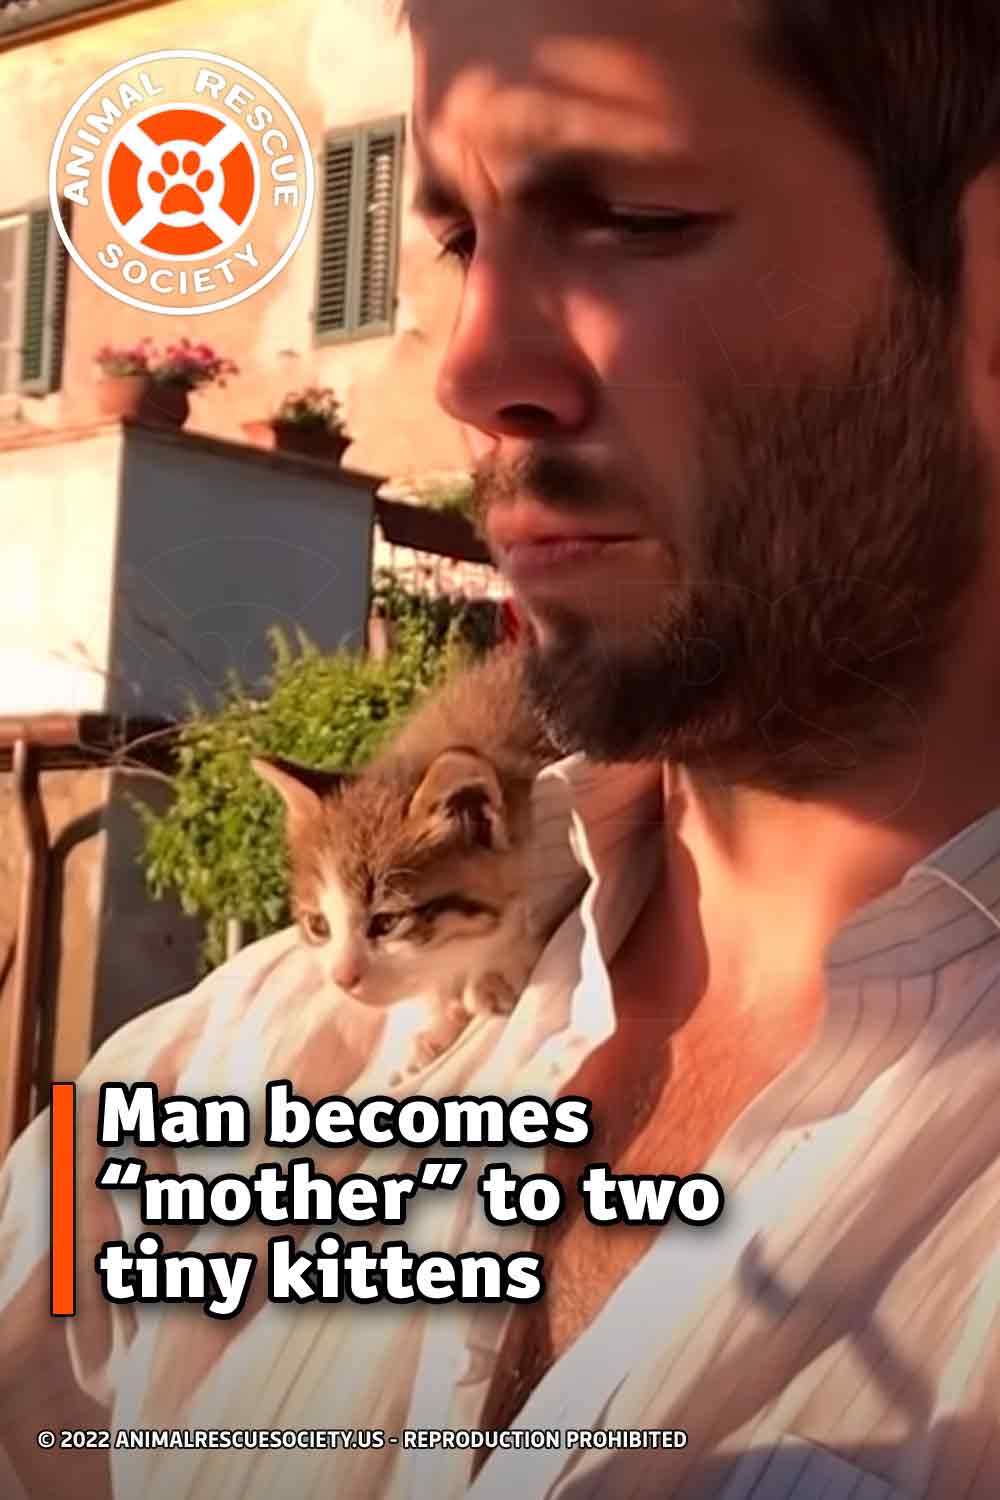 Man becomes “mother” to two tiny kittens